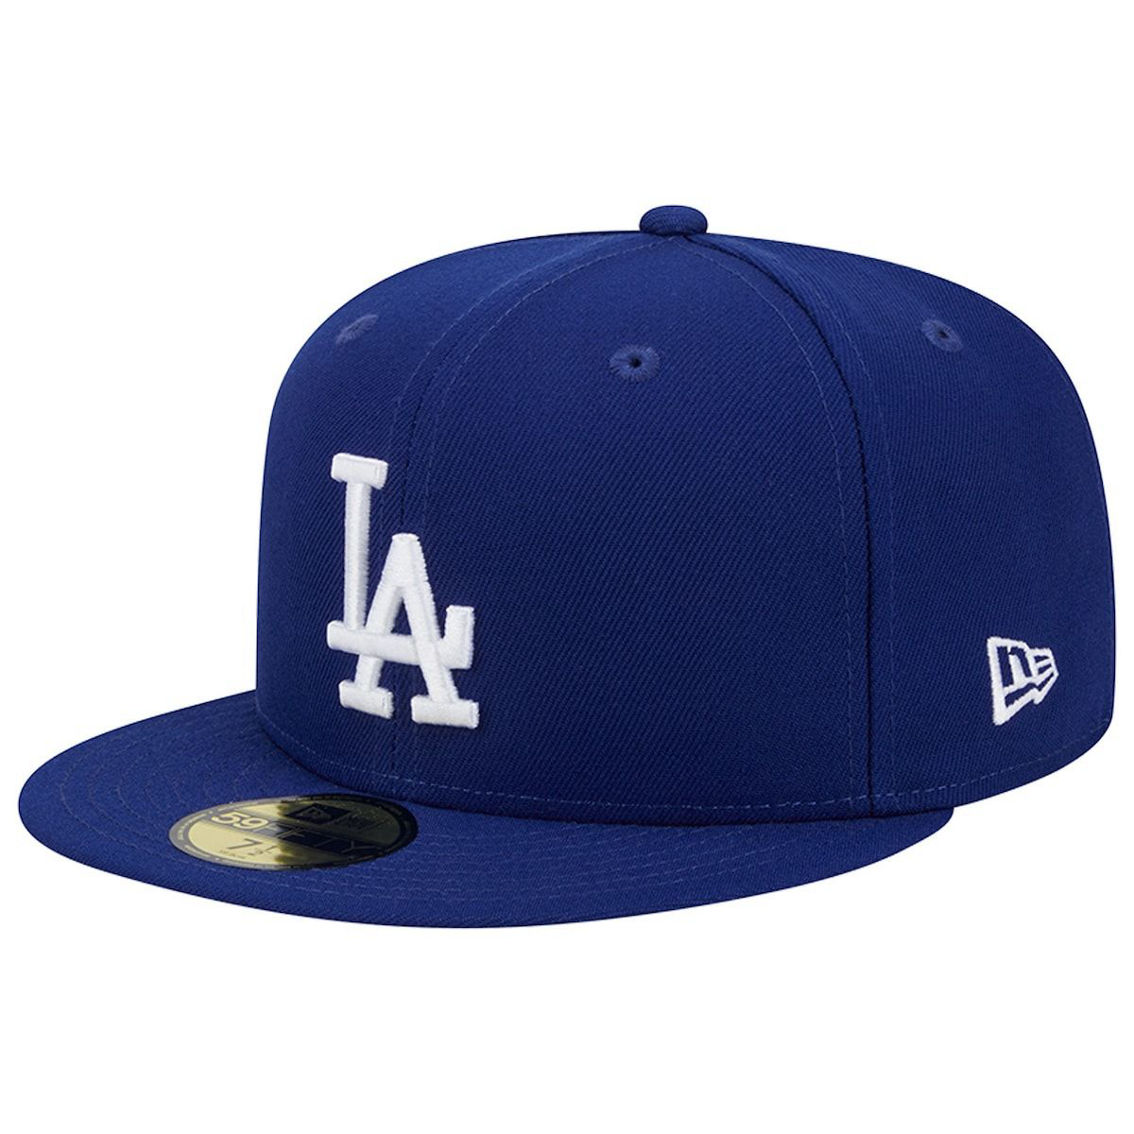 New Era Men's Royal Los Angeles Dodgers 2020 World Series Team Color 59FIFTY Fitted Hat - Image 4 of 4